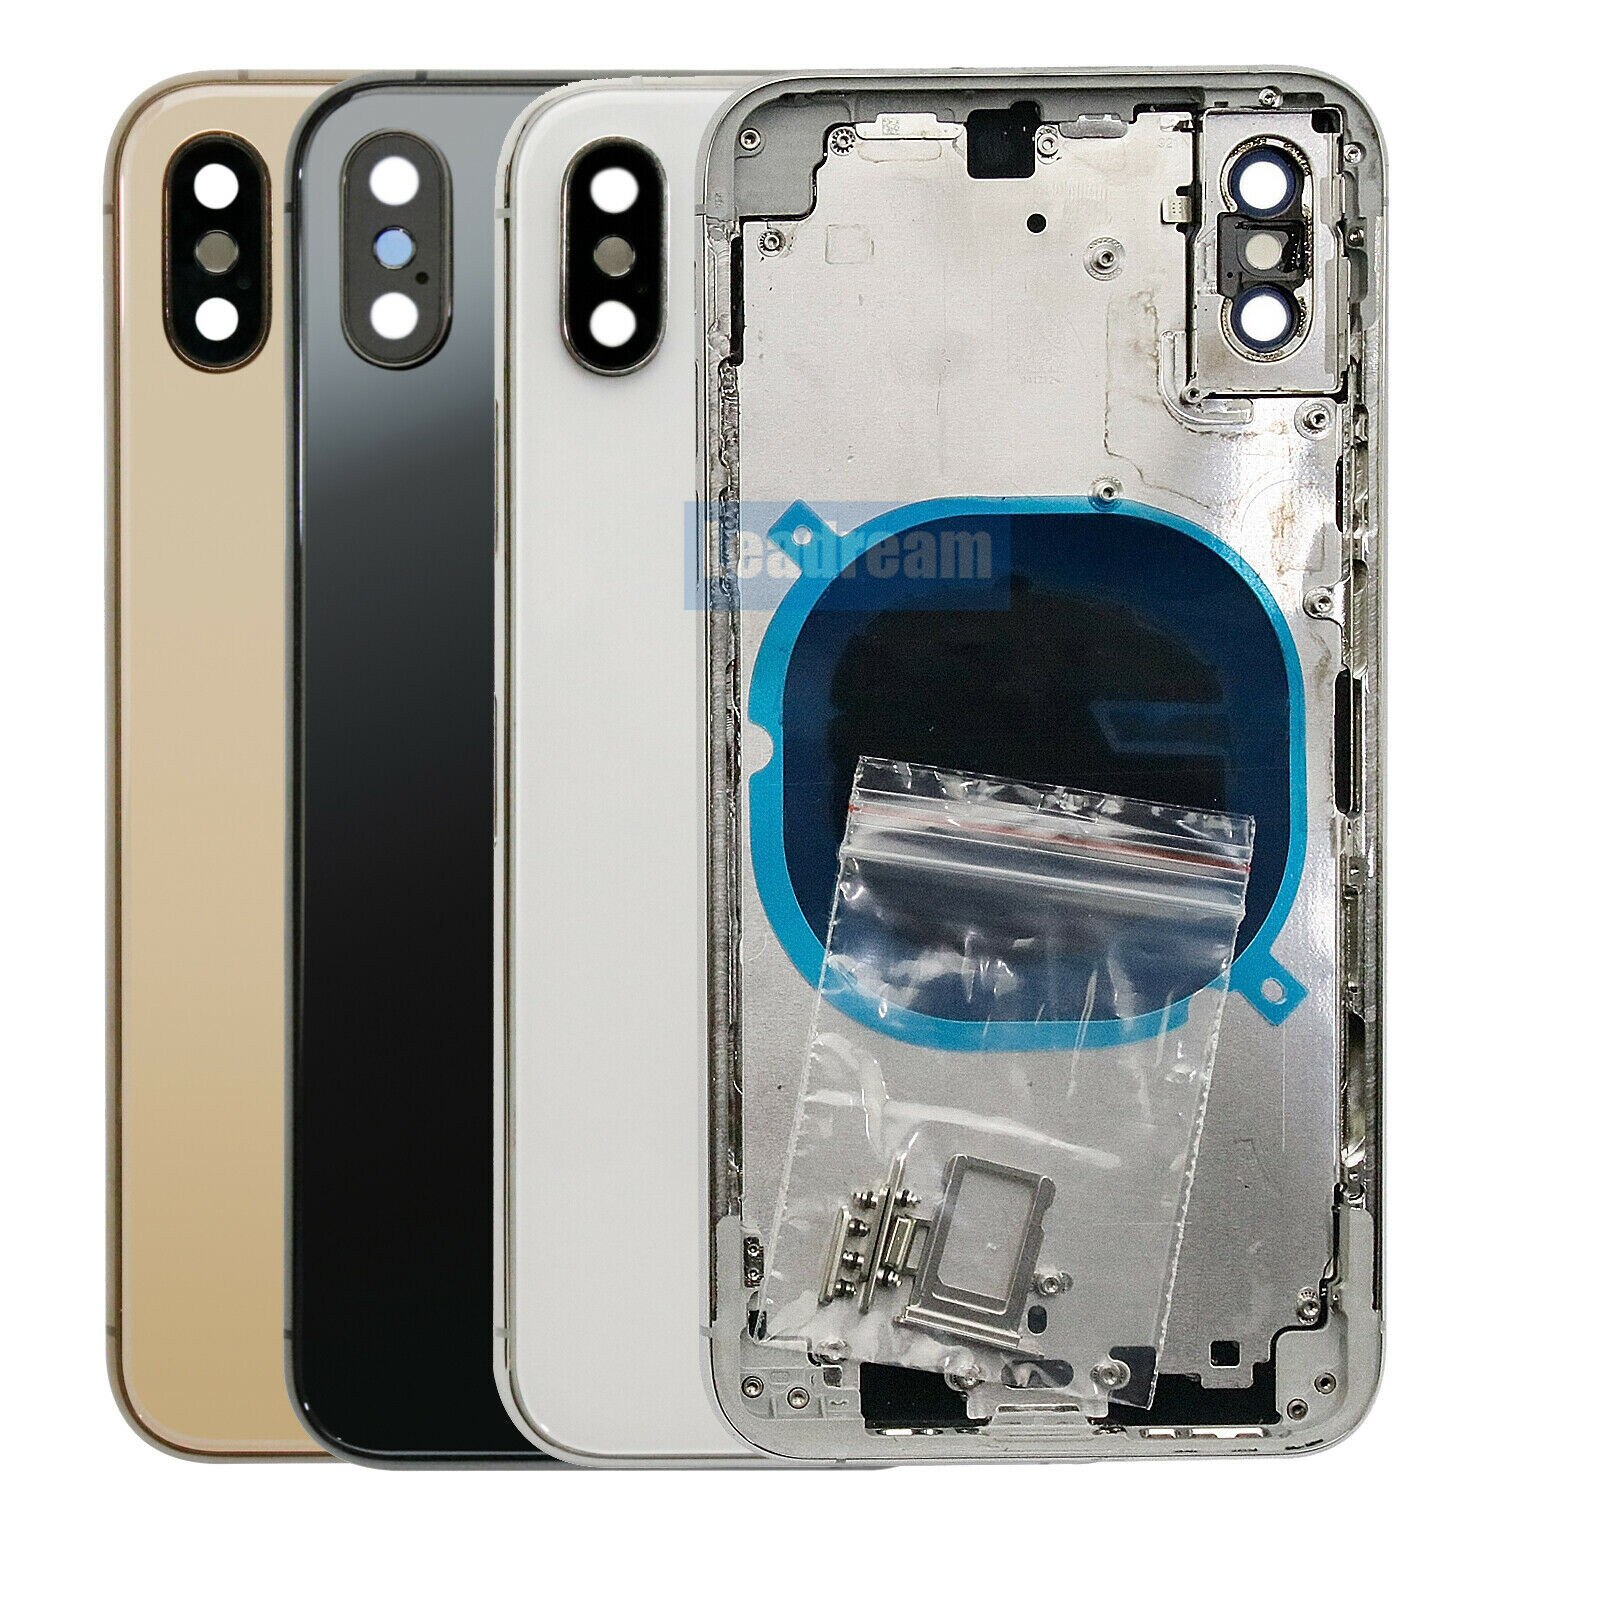 Back Housing For Iphone X Xs Max Xr ...